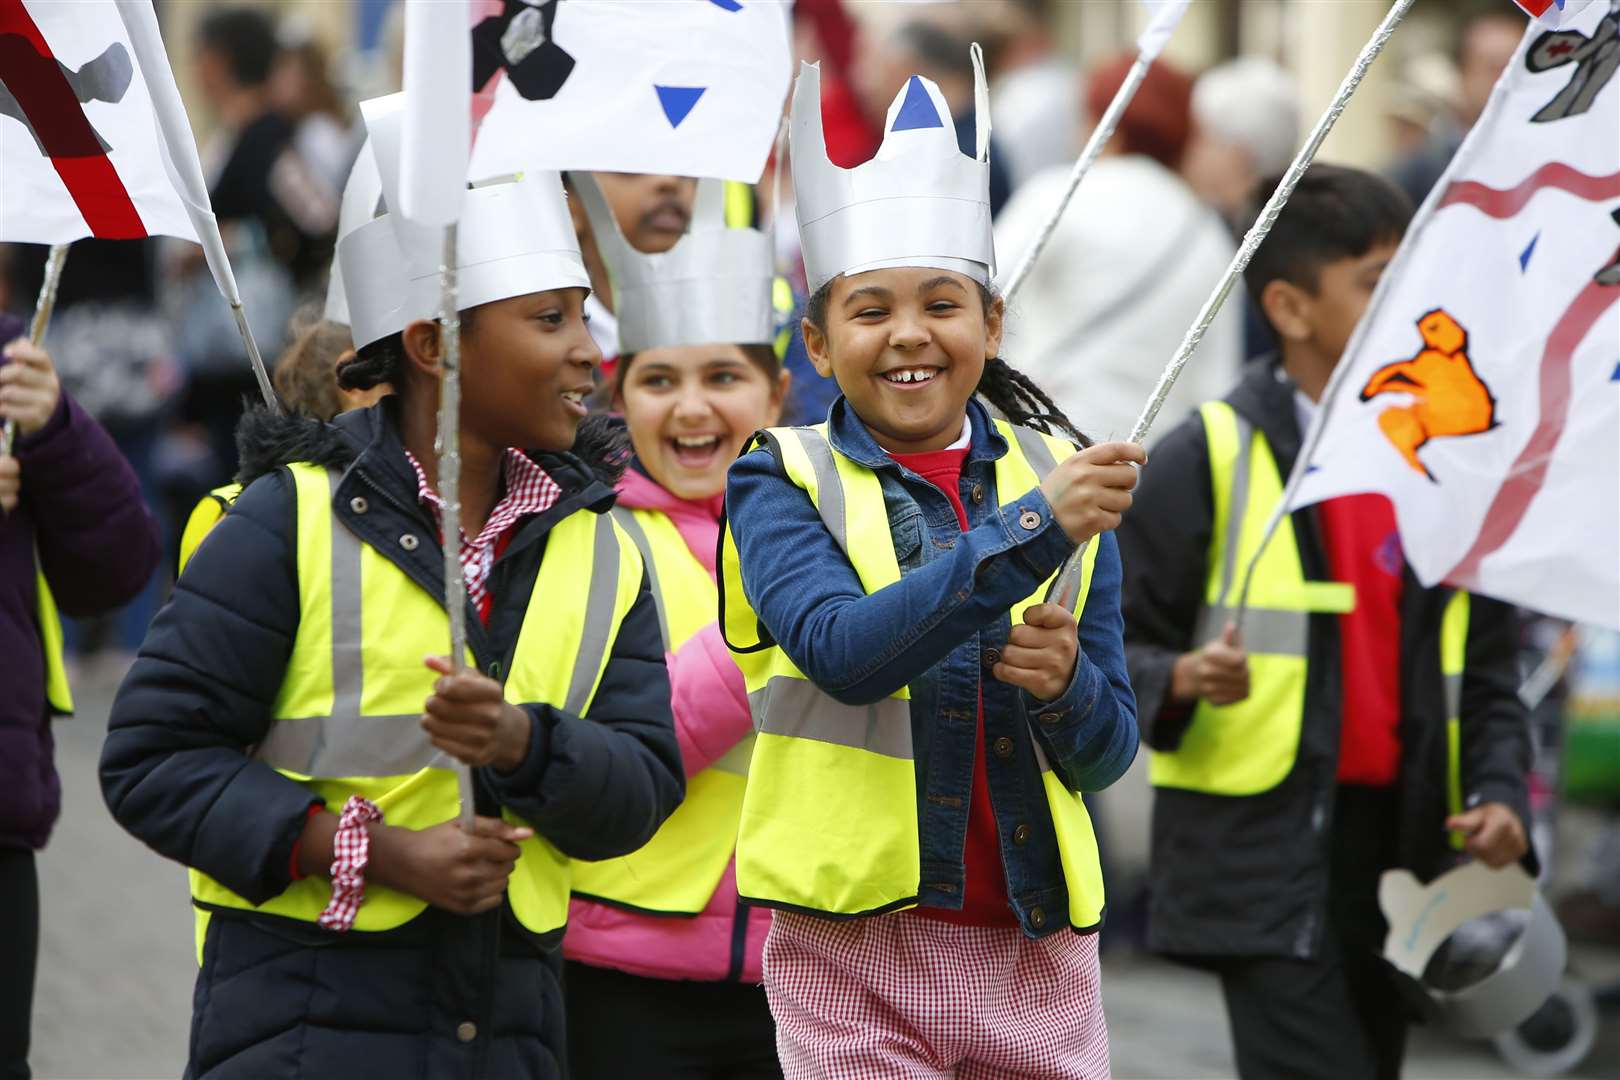 Pupils were dressed up in cardboard armour as part of the celebrations